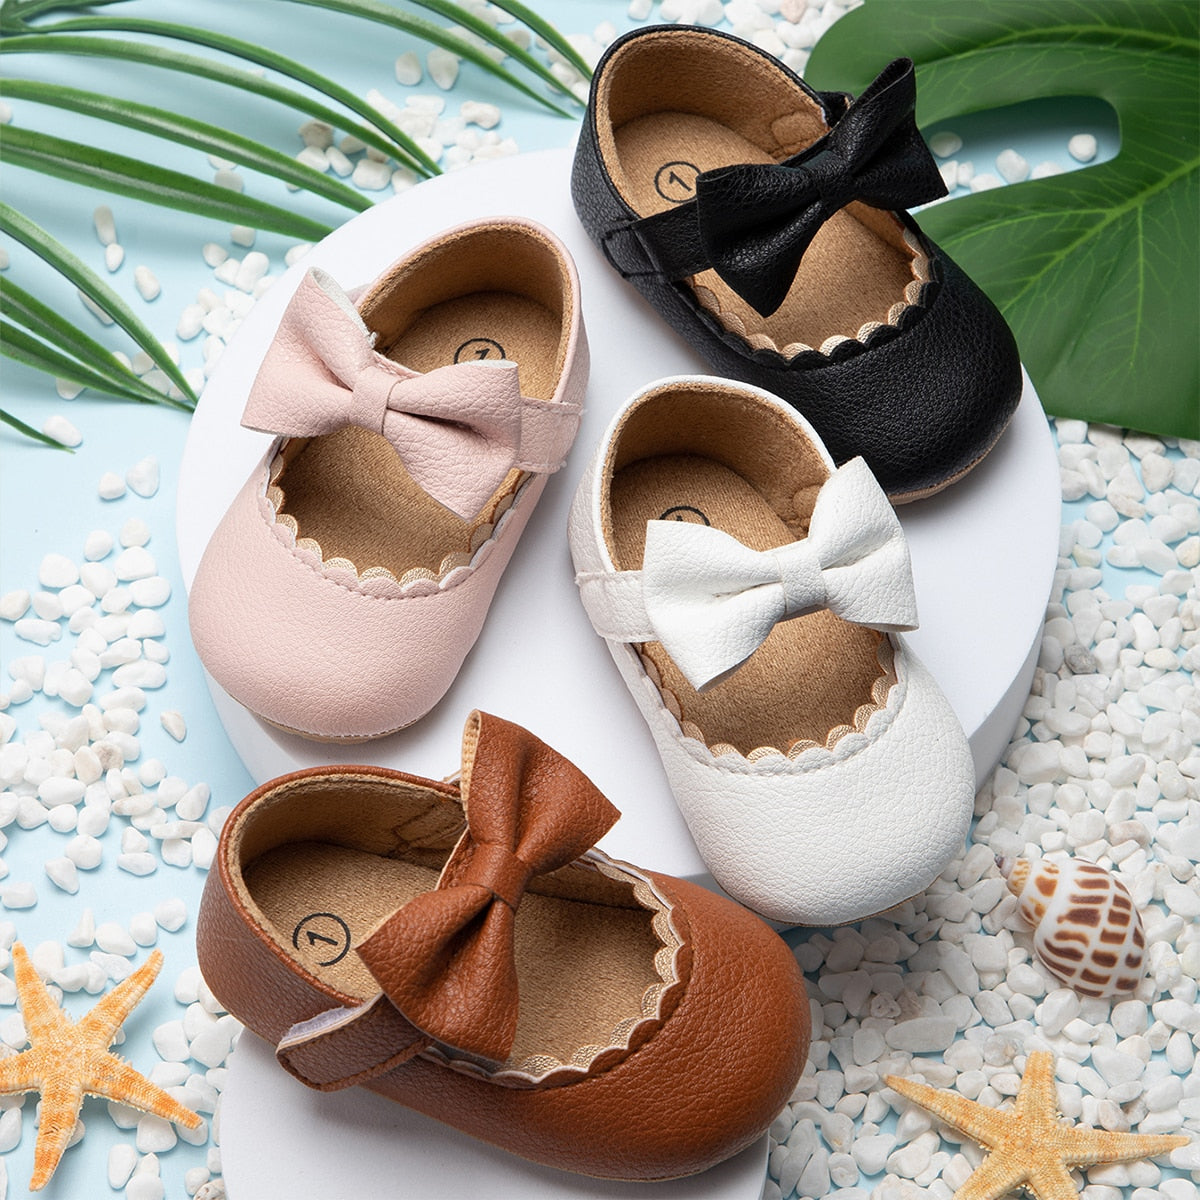 Infant bow Mary Janes shoes.